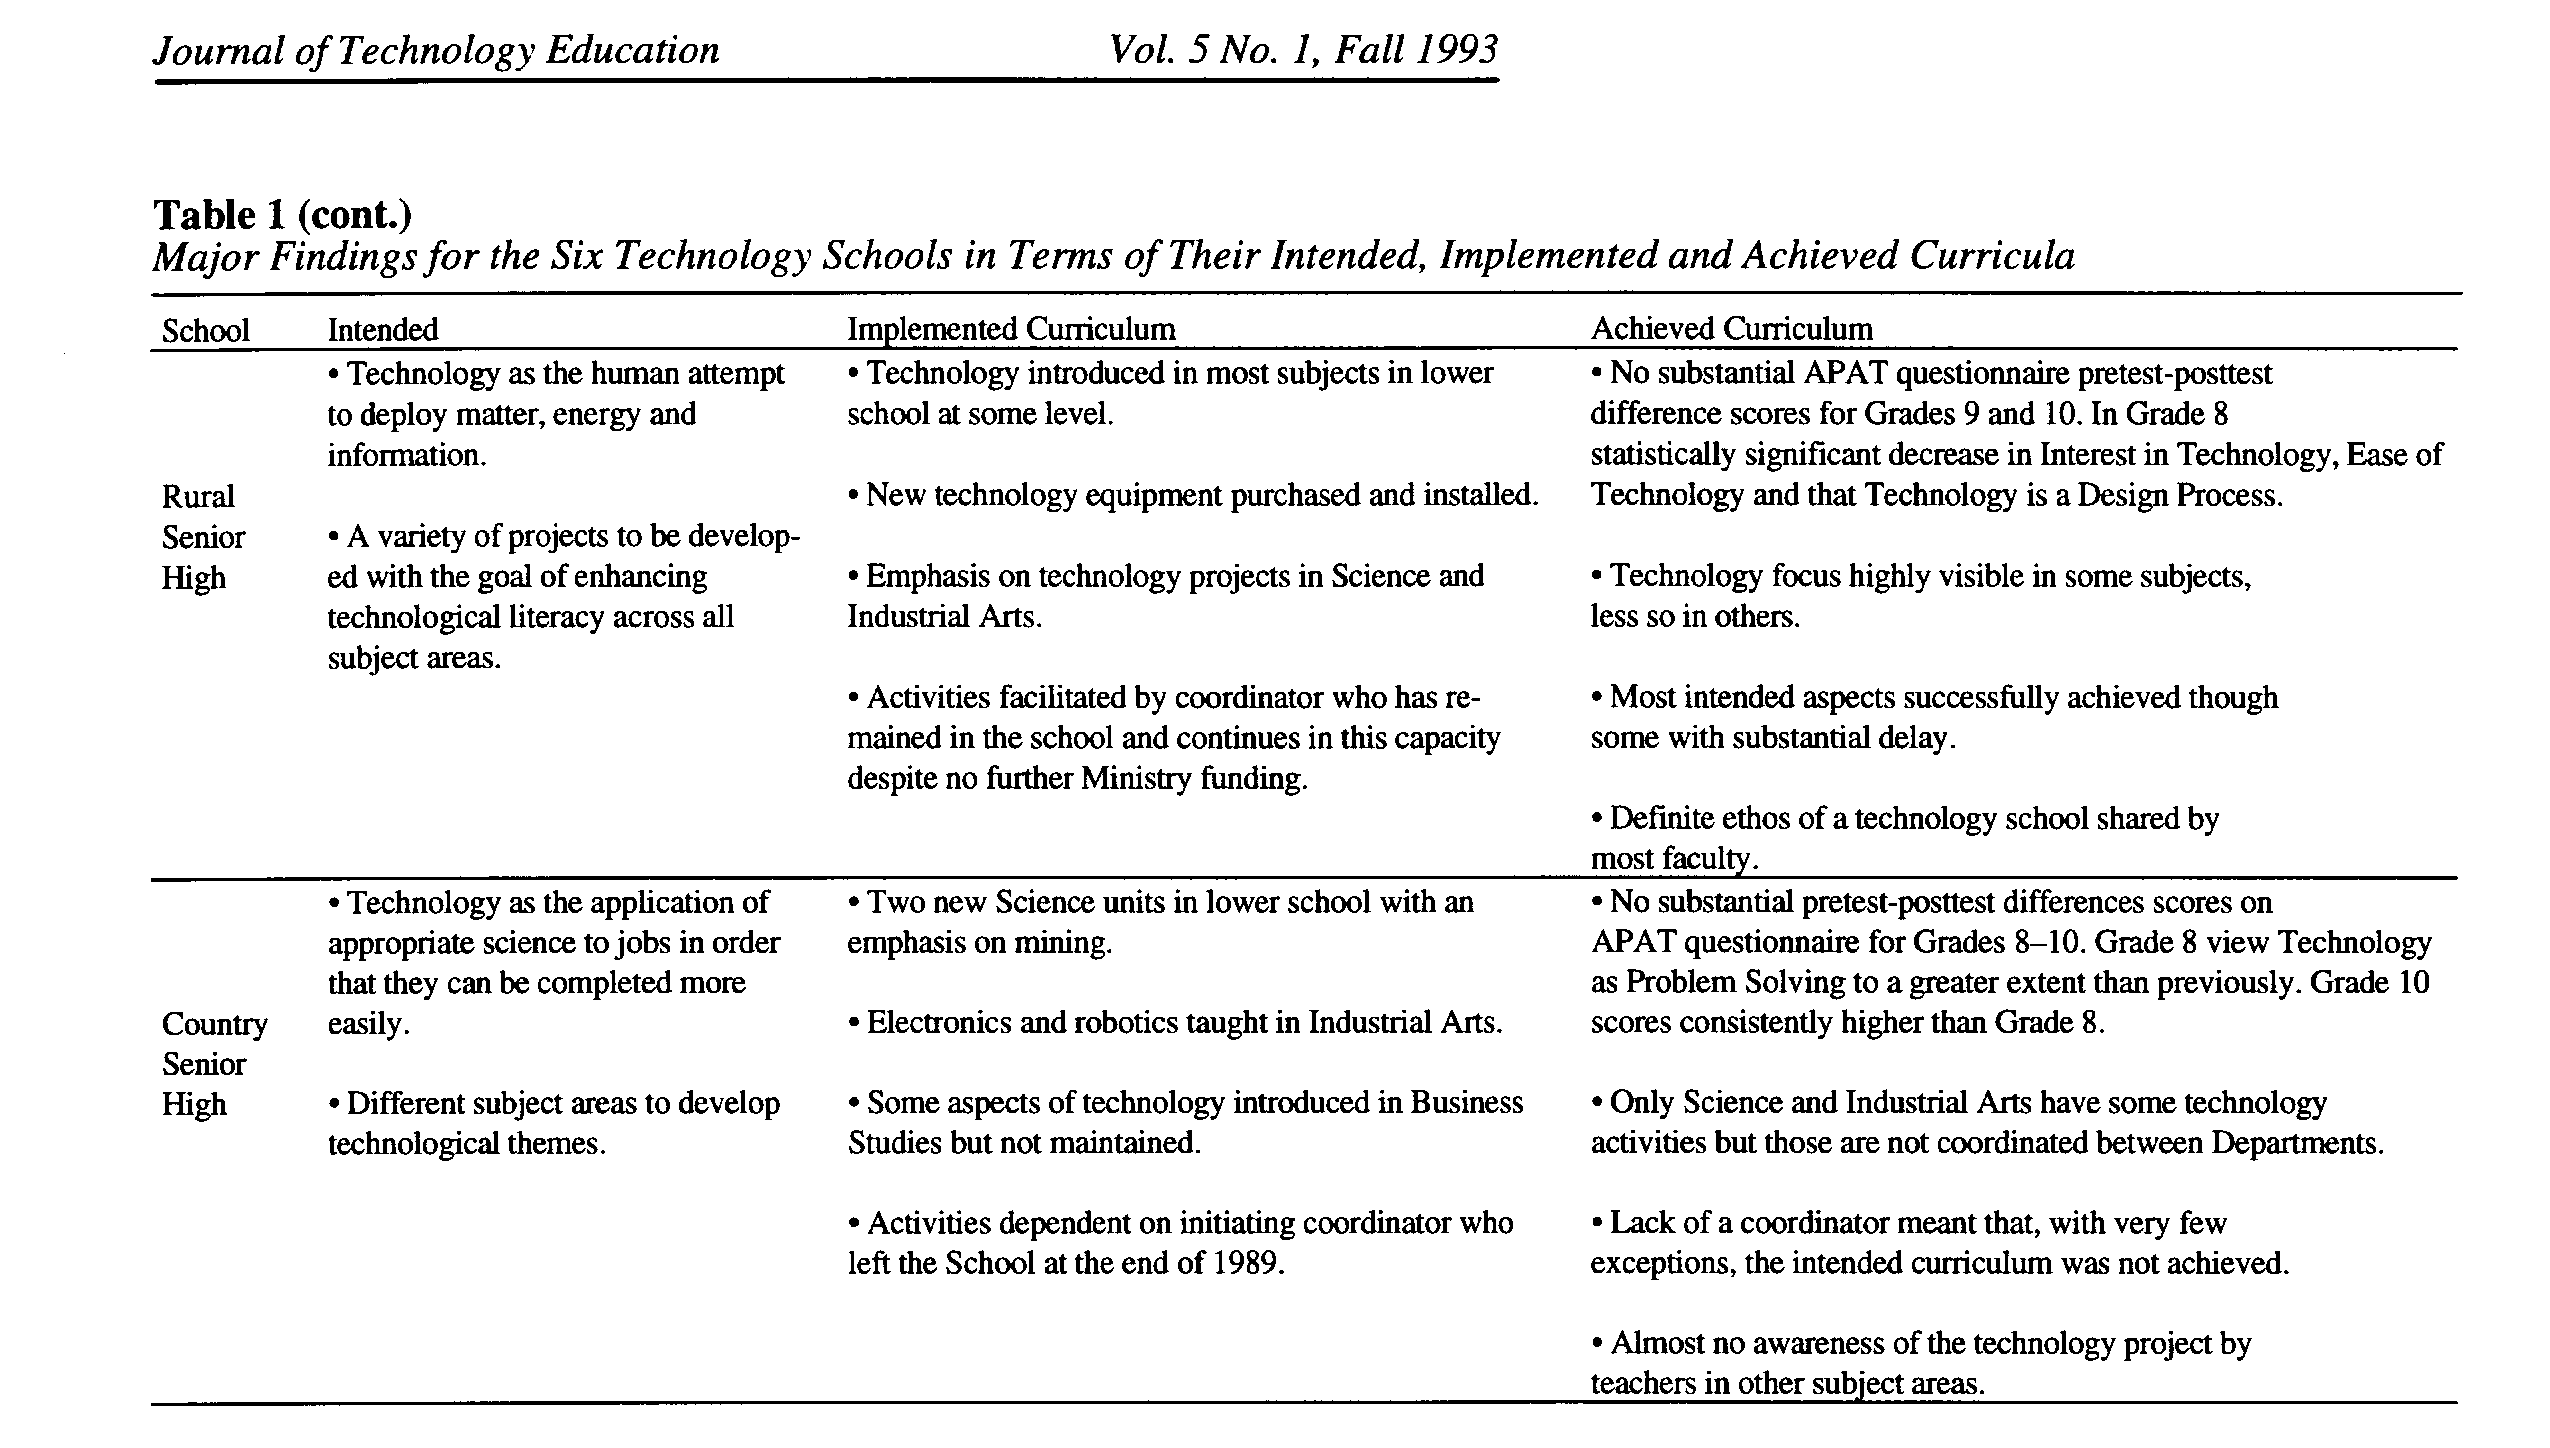 Table 1 part 2. Major Findings for the Six Technology Schools in Terms of Their Intended, Implemented and Achieved Curricula continued